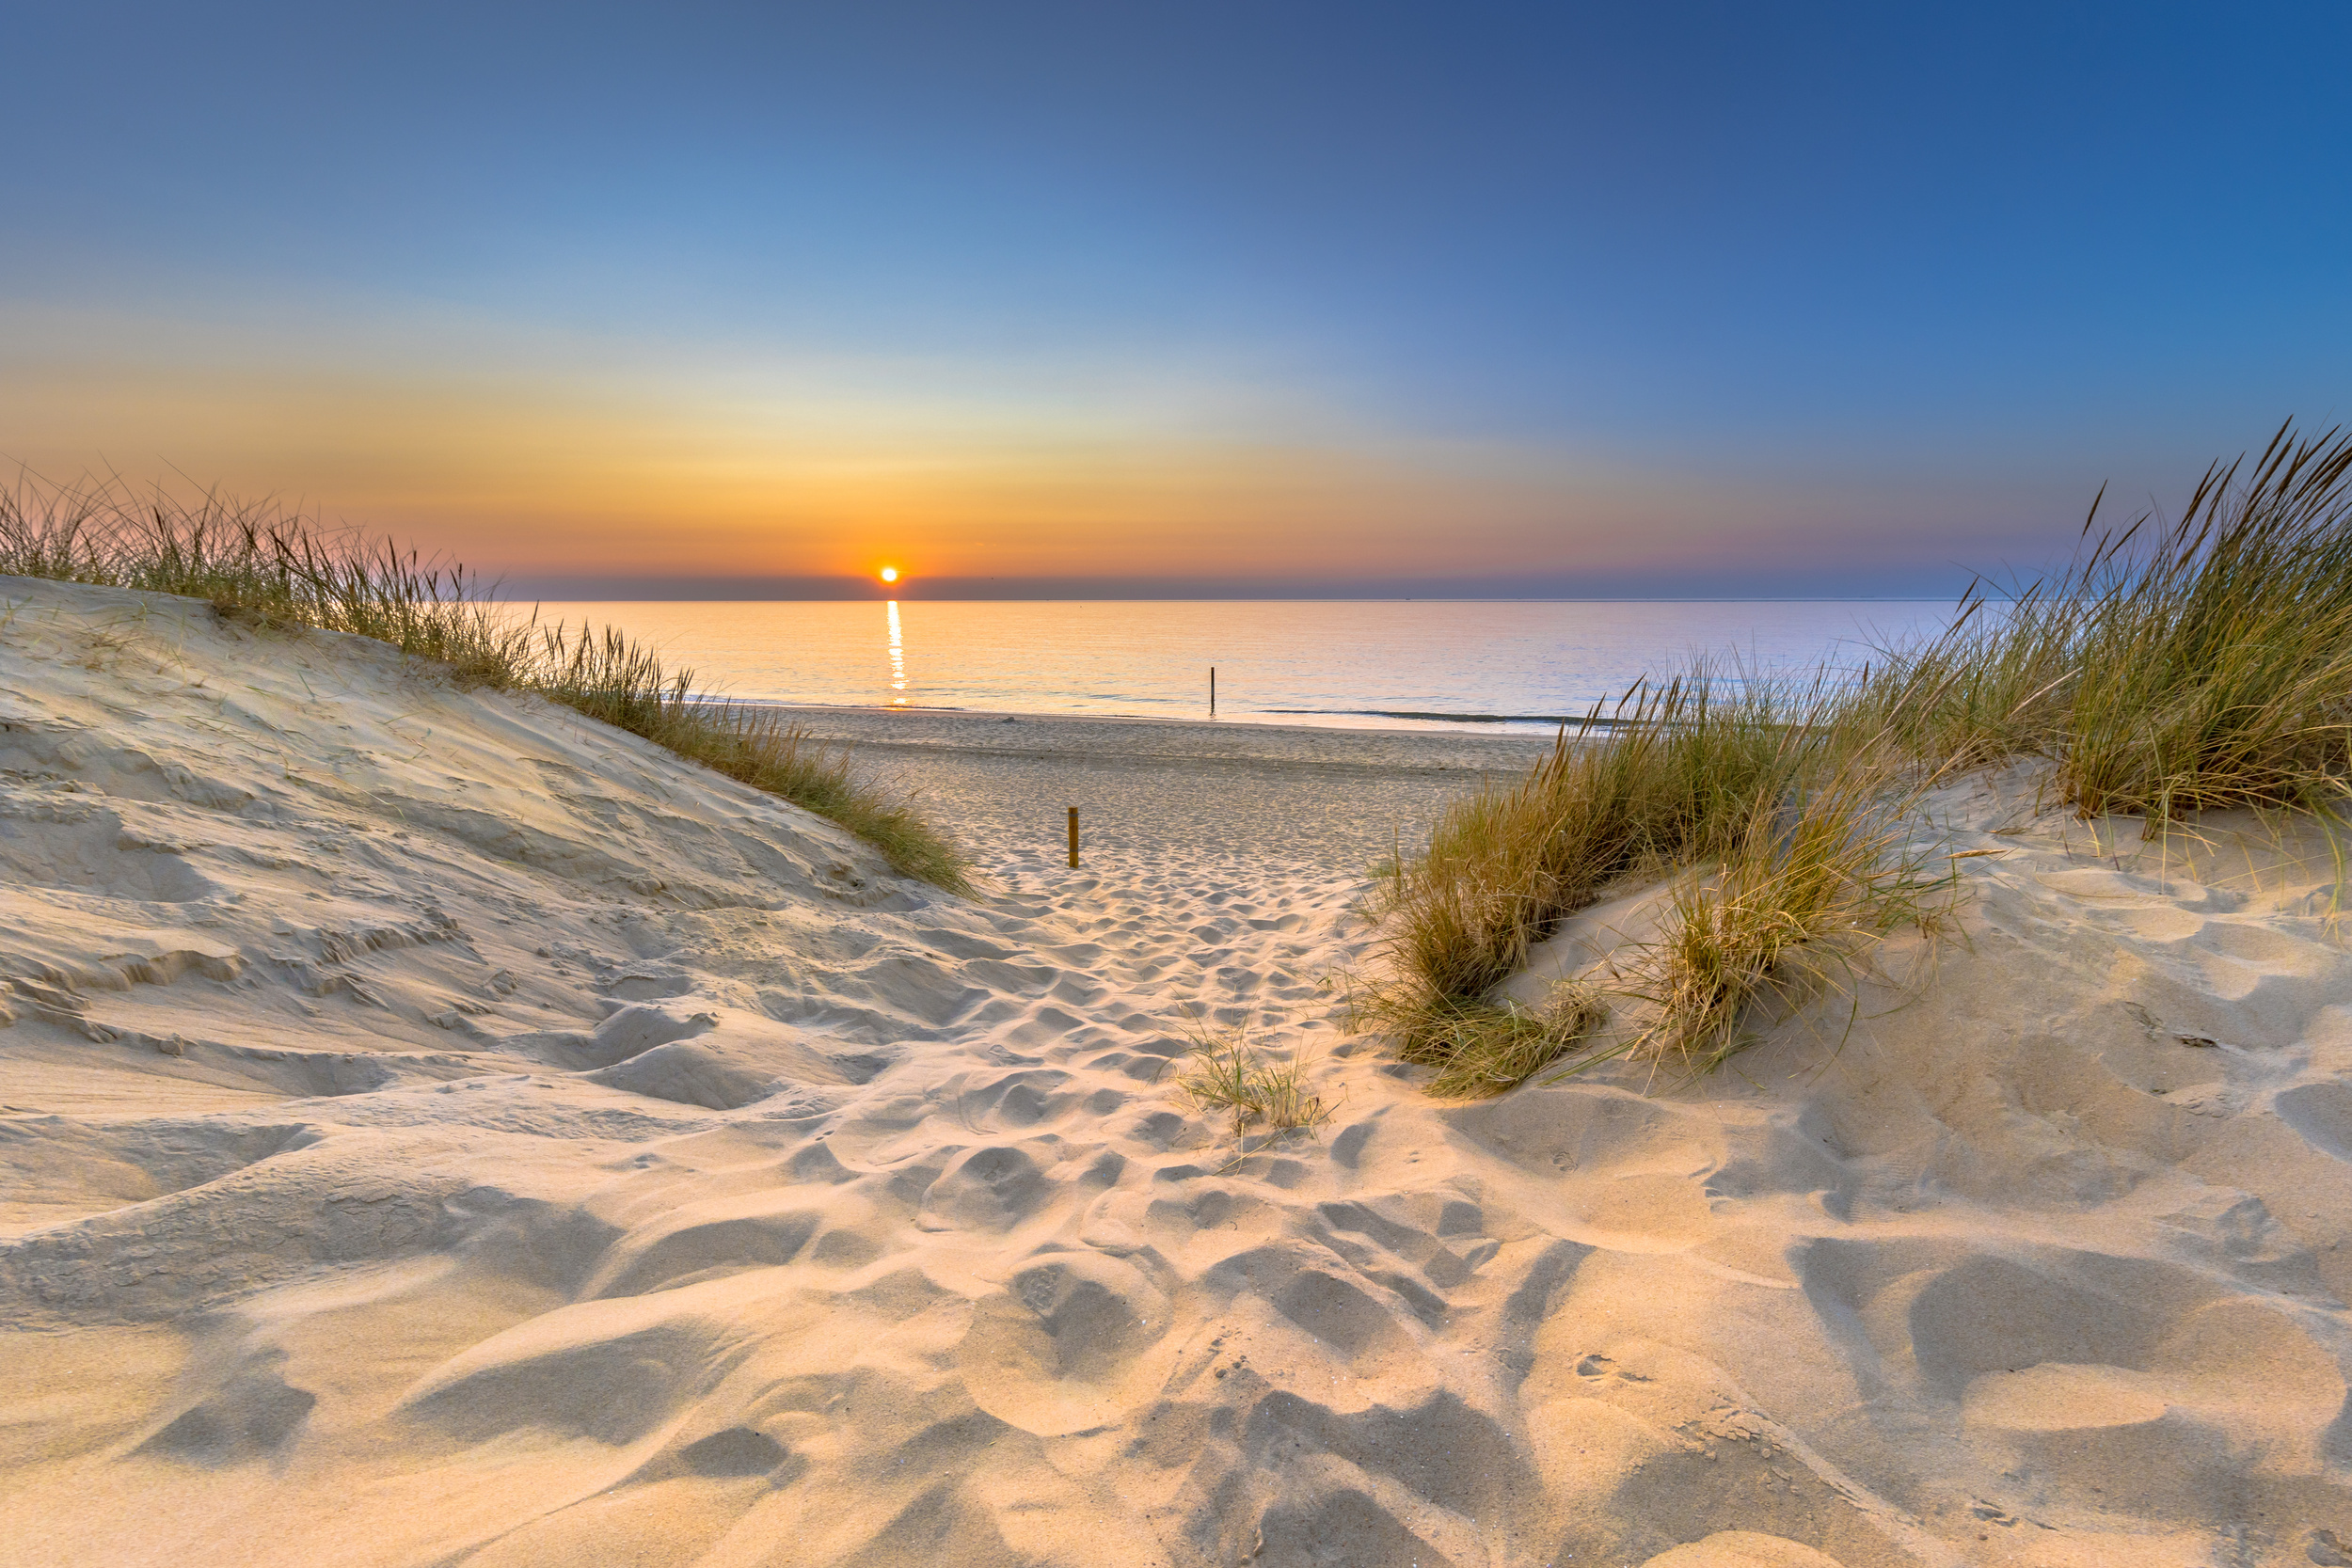 <p>The Netherlands isn’t exactly the first place that comes to mind when most imagine a coastal escape. However, the Zeeland province in the south of the country is home to countless adorable beach towns where stretches of golden sand stretch for miles. Favorites include Domburg, Westkapelle, and Zoutelande.</p><p>You may also like: <a href='https://www.yardbarker.com/lifestyle/articles/the_11_best_places_to_hike_in_washington_state_012124/s1__38578428'>The 11 best places to hike in Washington State</a></p>